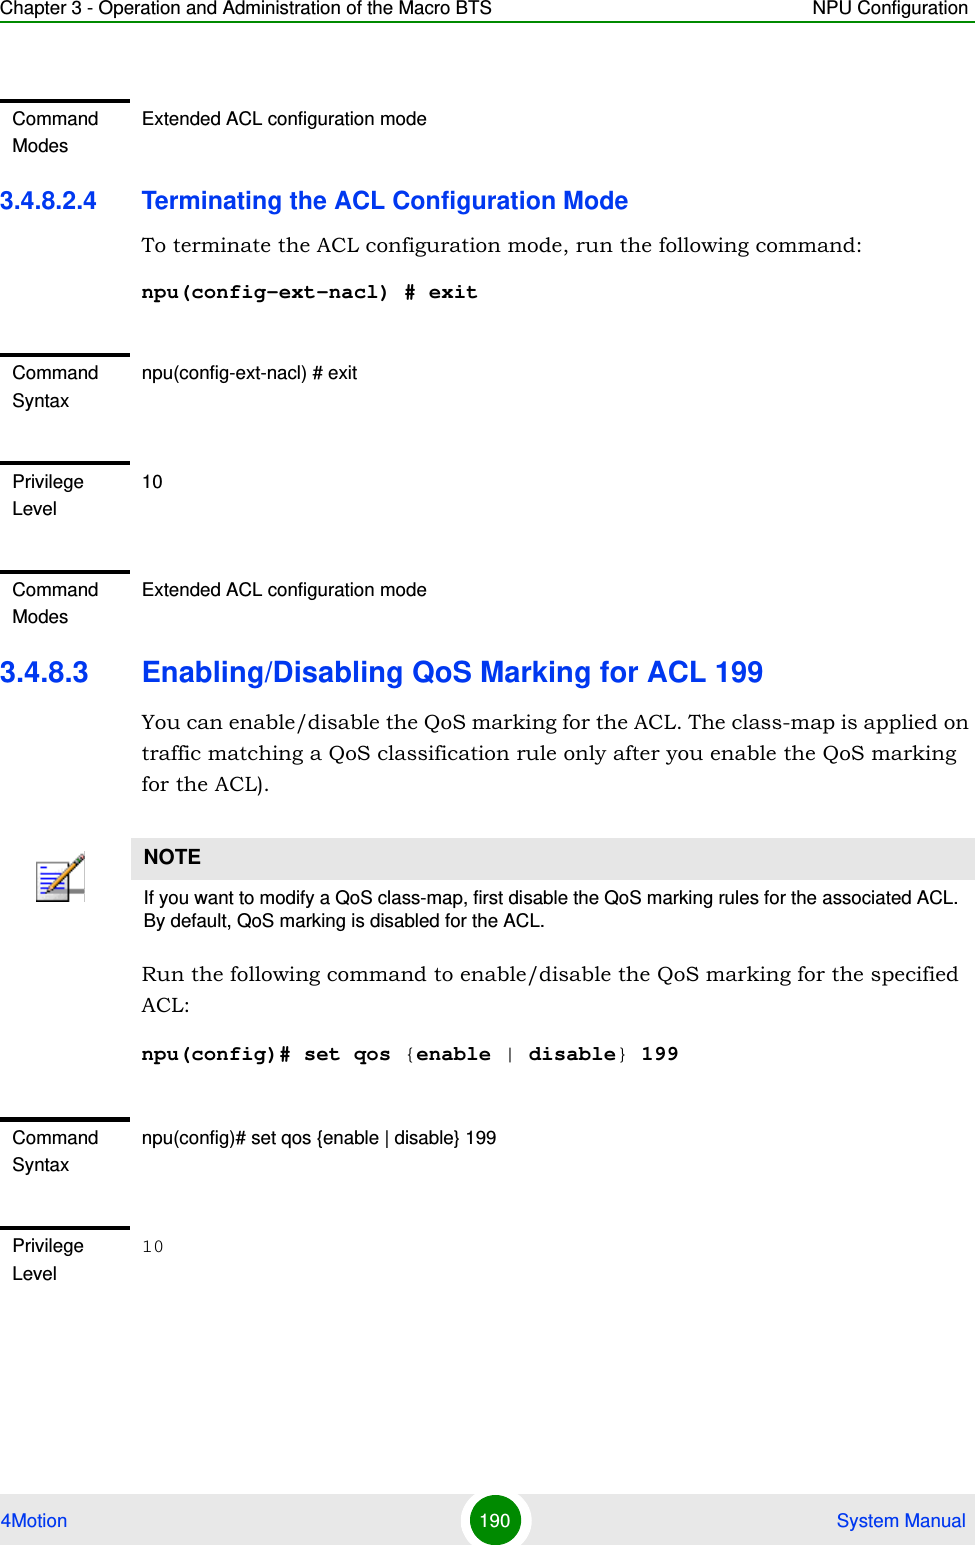 Chapter 3 - Operation and Administration of the Macro BTS NPU Configuration4Motion 190  System Manual3.4.8.2.4 Terminating the ACL Configuration ModeTo terminate the ACL configuration mode, run the following command:npu(config-ext-nacl) # exit3.4.8.3 Enabling/Disabling QoS Marking for ACL 199You can enable/disable the QoS marking for the ACL. The class-map is applied on traffic matching a QoS classification rule only after you enable the QoS marking for the ACL).Run the following command to enable/disable the QoS marking for the specified ACL:npu(config)# set qos {enable | disable} 199 Command ModesExtended ACL configuration modeCommand Syntaxnpu(config-ext-nacl) # exitPrivilege Level10Command ModesExtended ACL configuration modeNOTEIf you want to modify a QoS class-map, first disable the QoS marking rules for the associated ACL. By default, QoS marking is disabled for the ACL. Command Syntaxnpu(config)# set qos {enable | disable} 199Privilege Level10